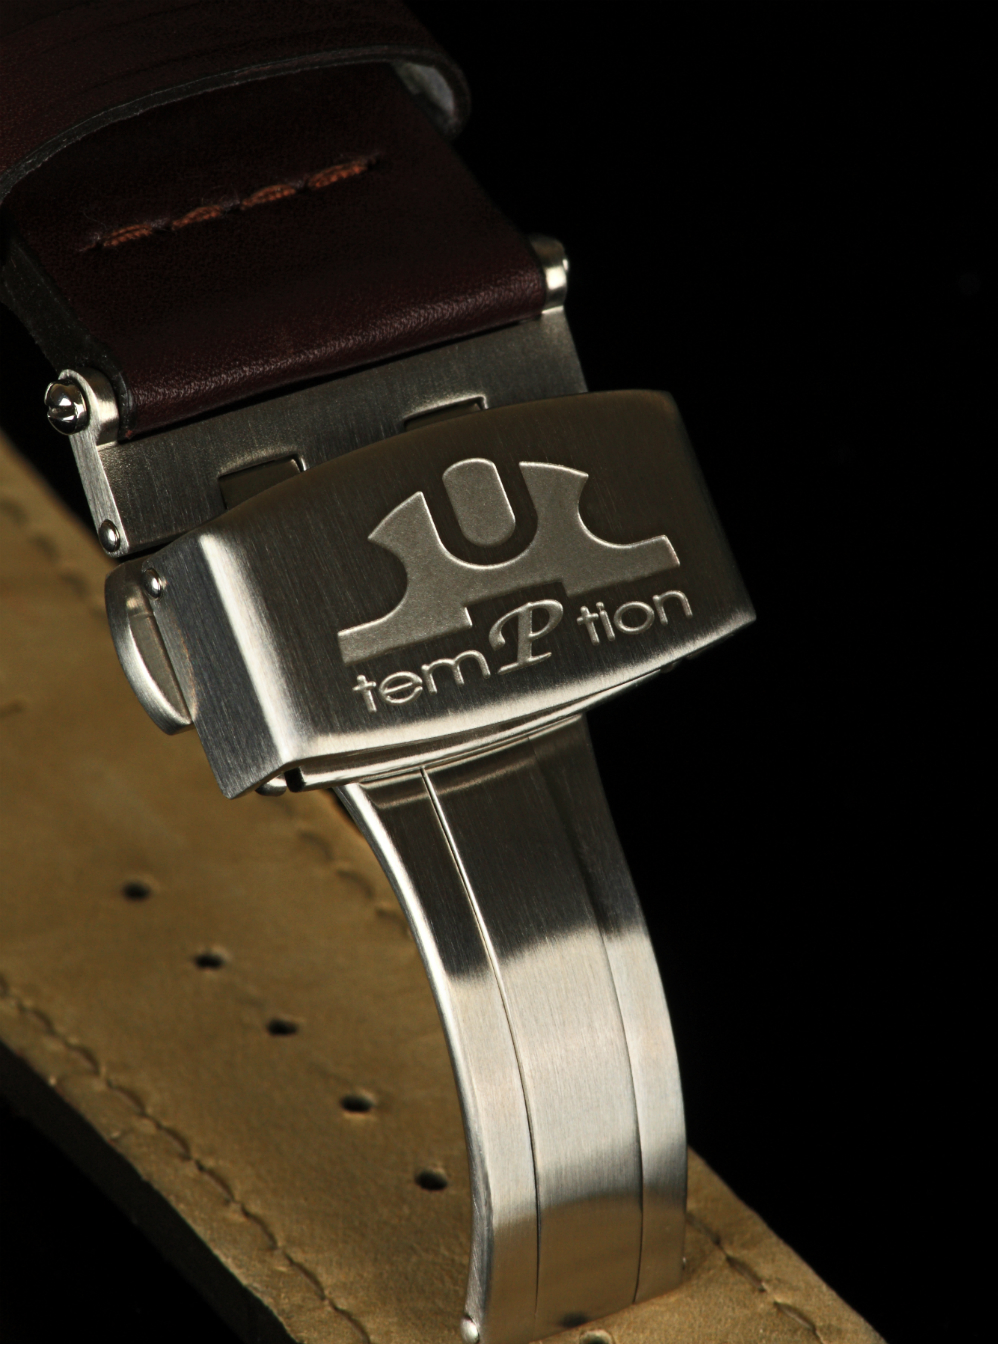 The Design Process & Challenges Of The Temption Cameo Rectangular Watch Feature Articles 